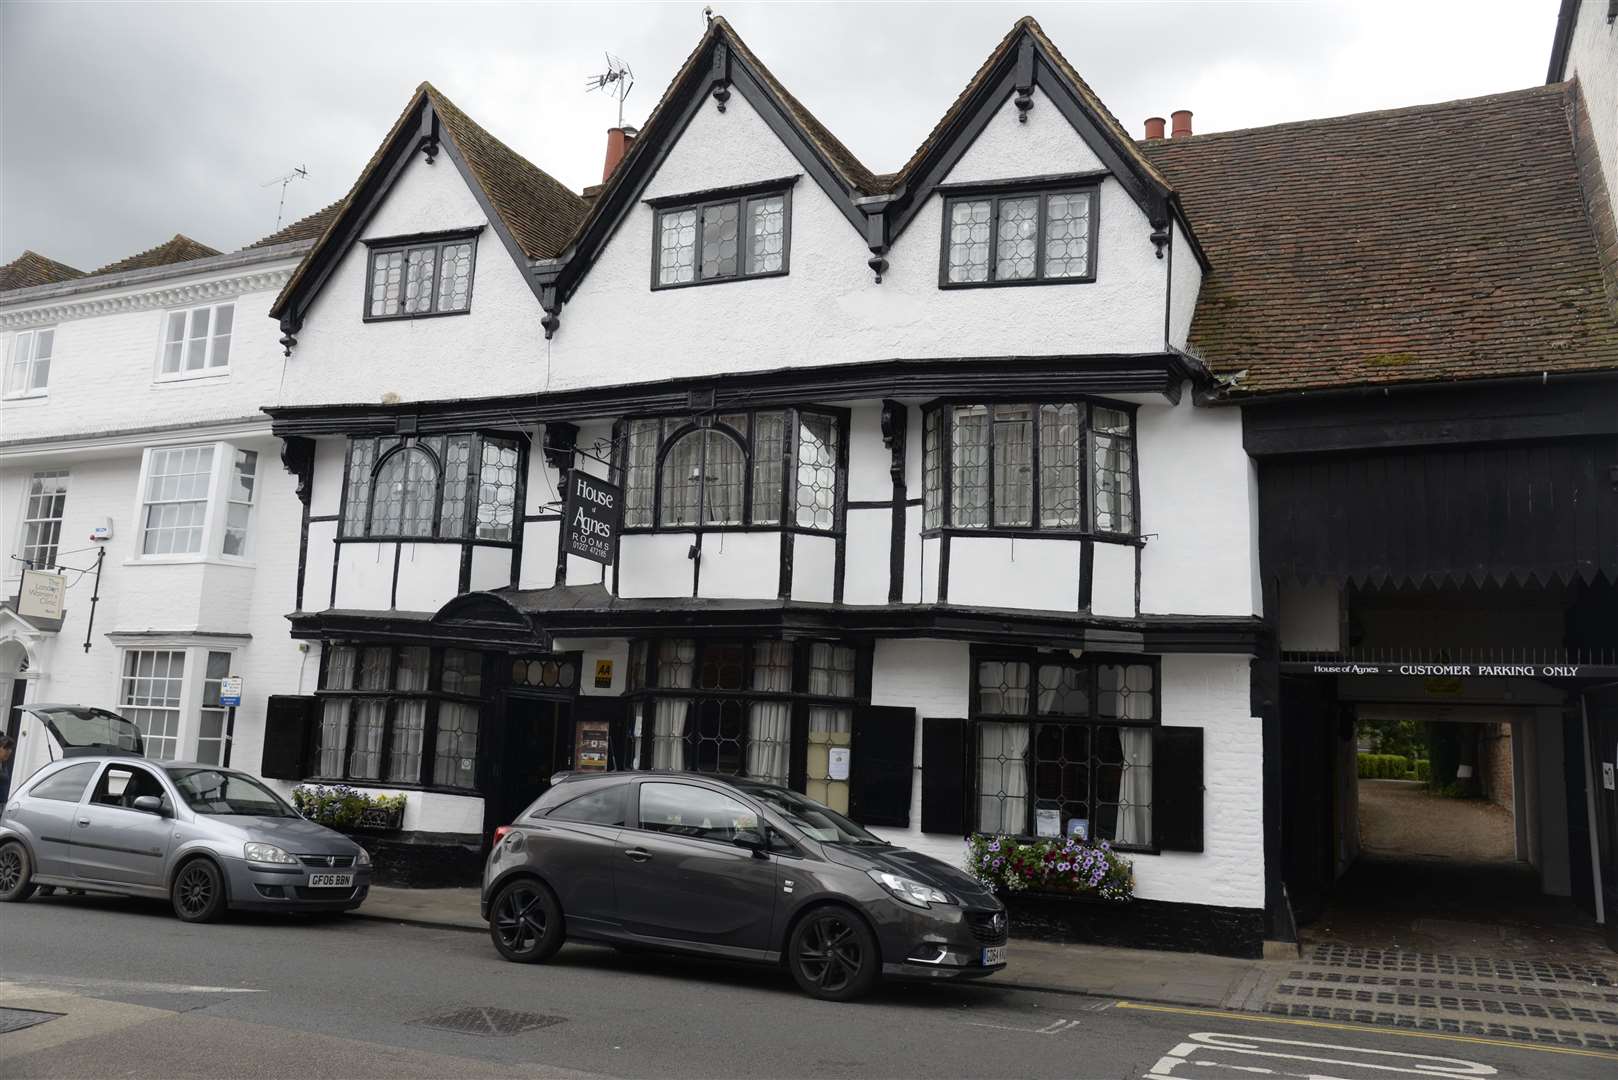 The House of Agnes in St Dunstan's Street, Canterbury